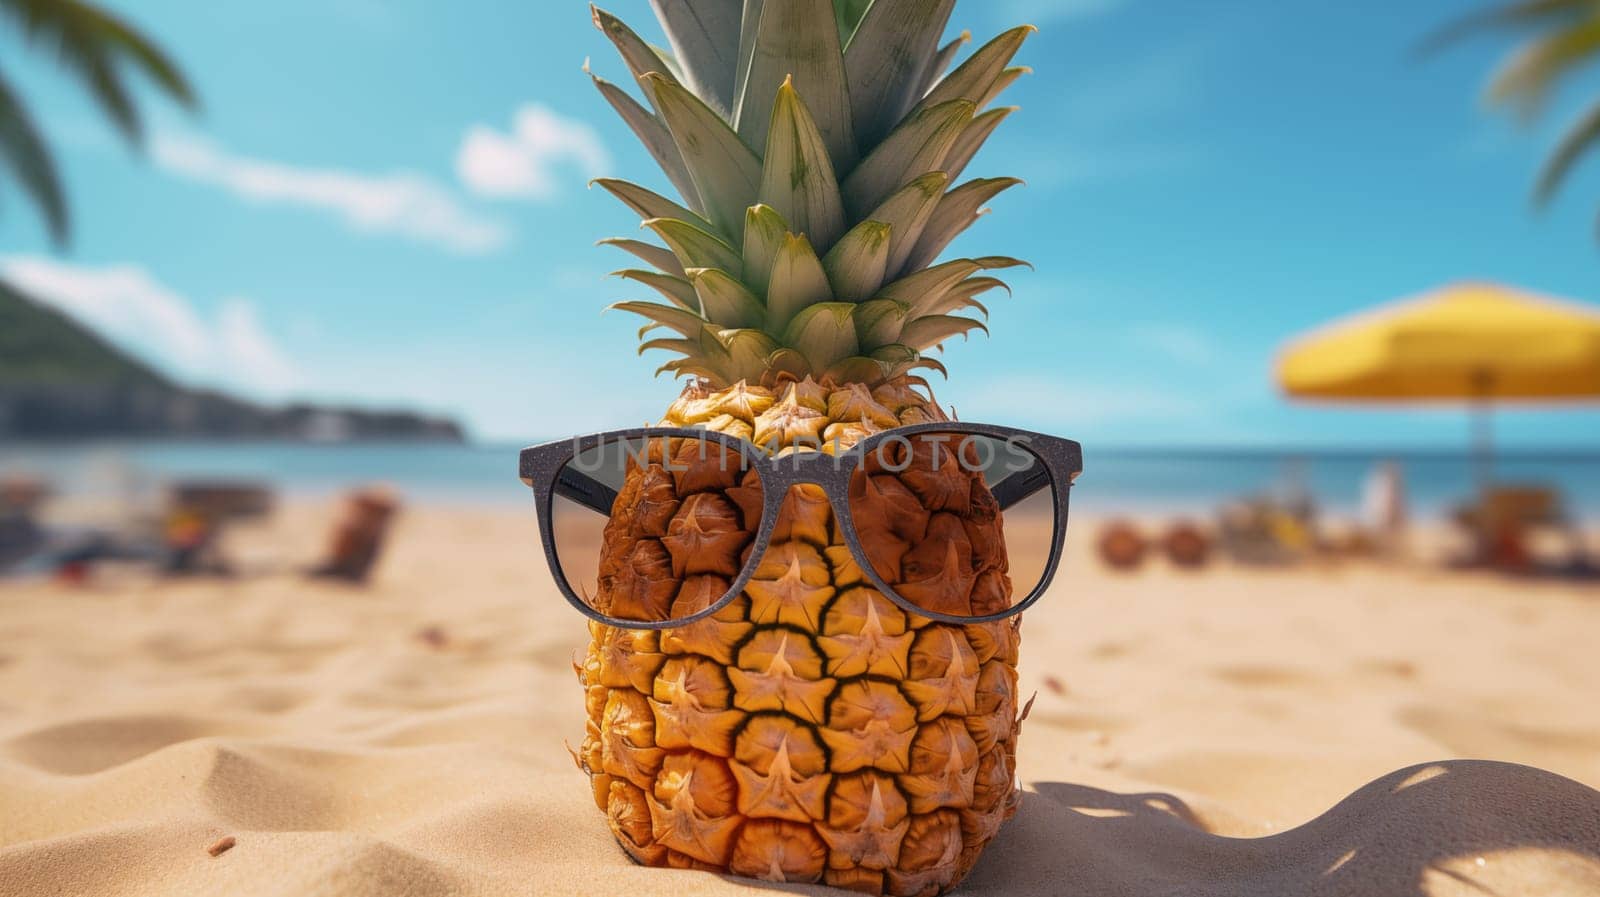 Cute Pineapple With Sunglasses stand In The Beach by Zakharova